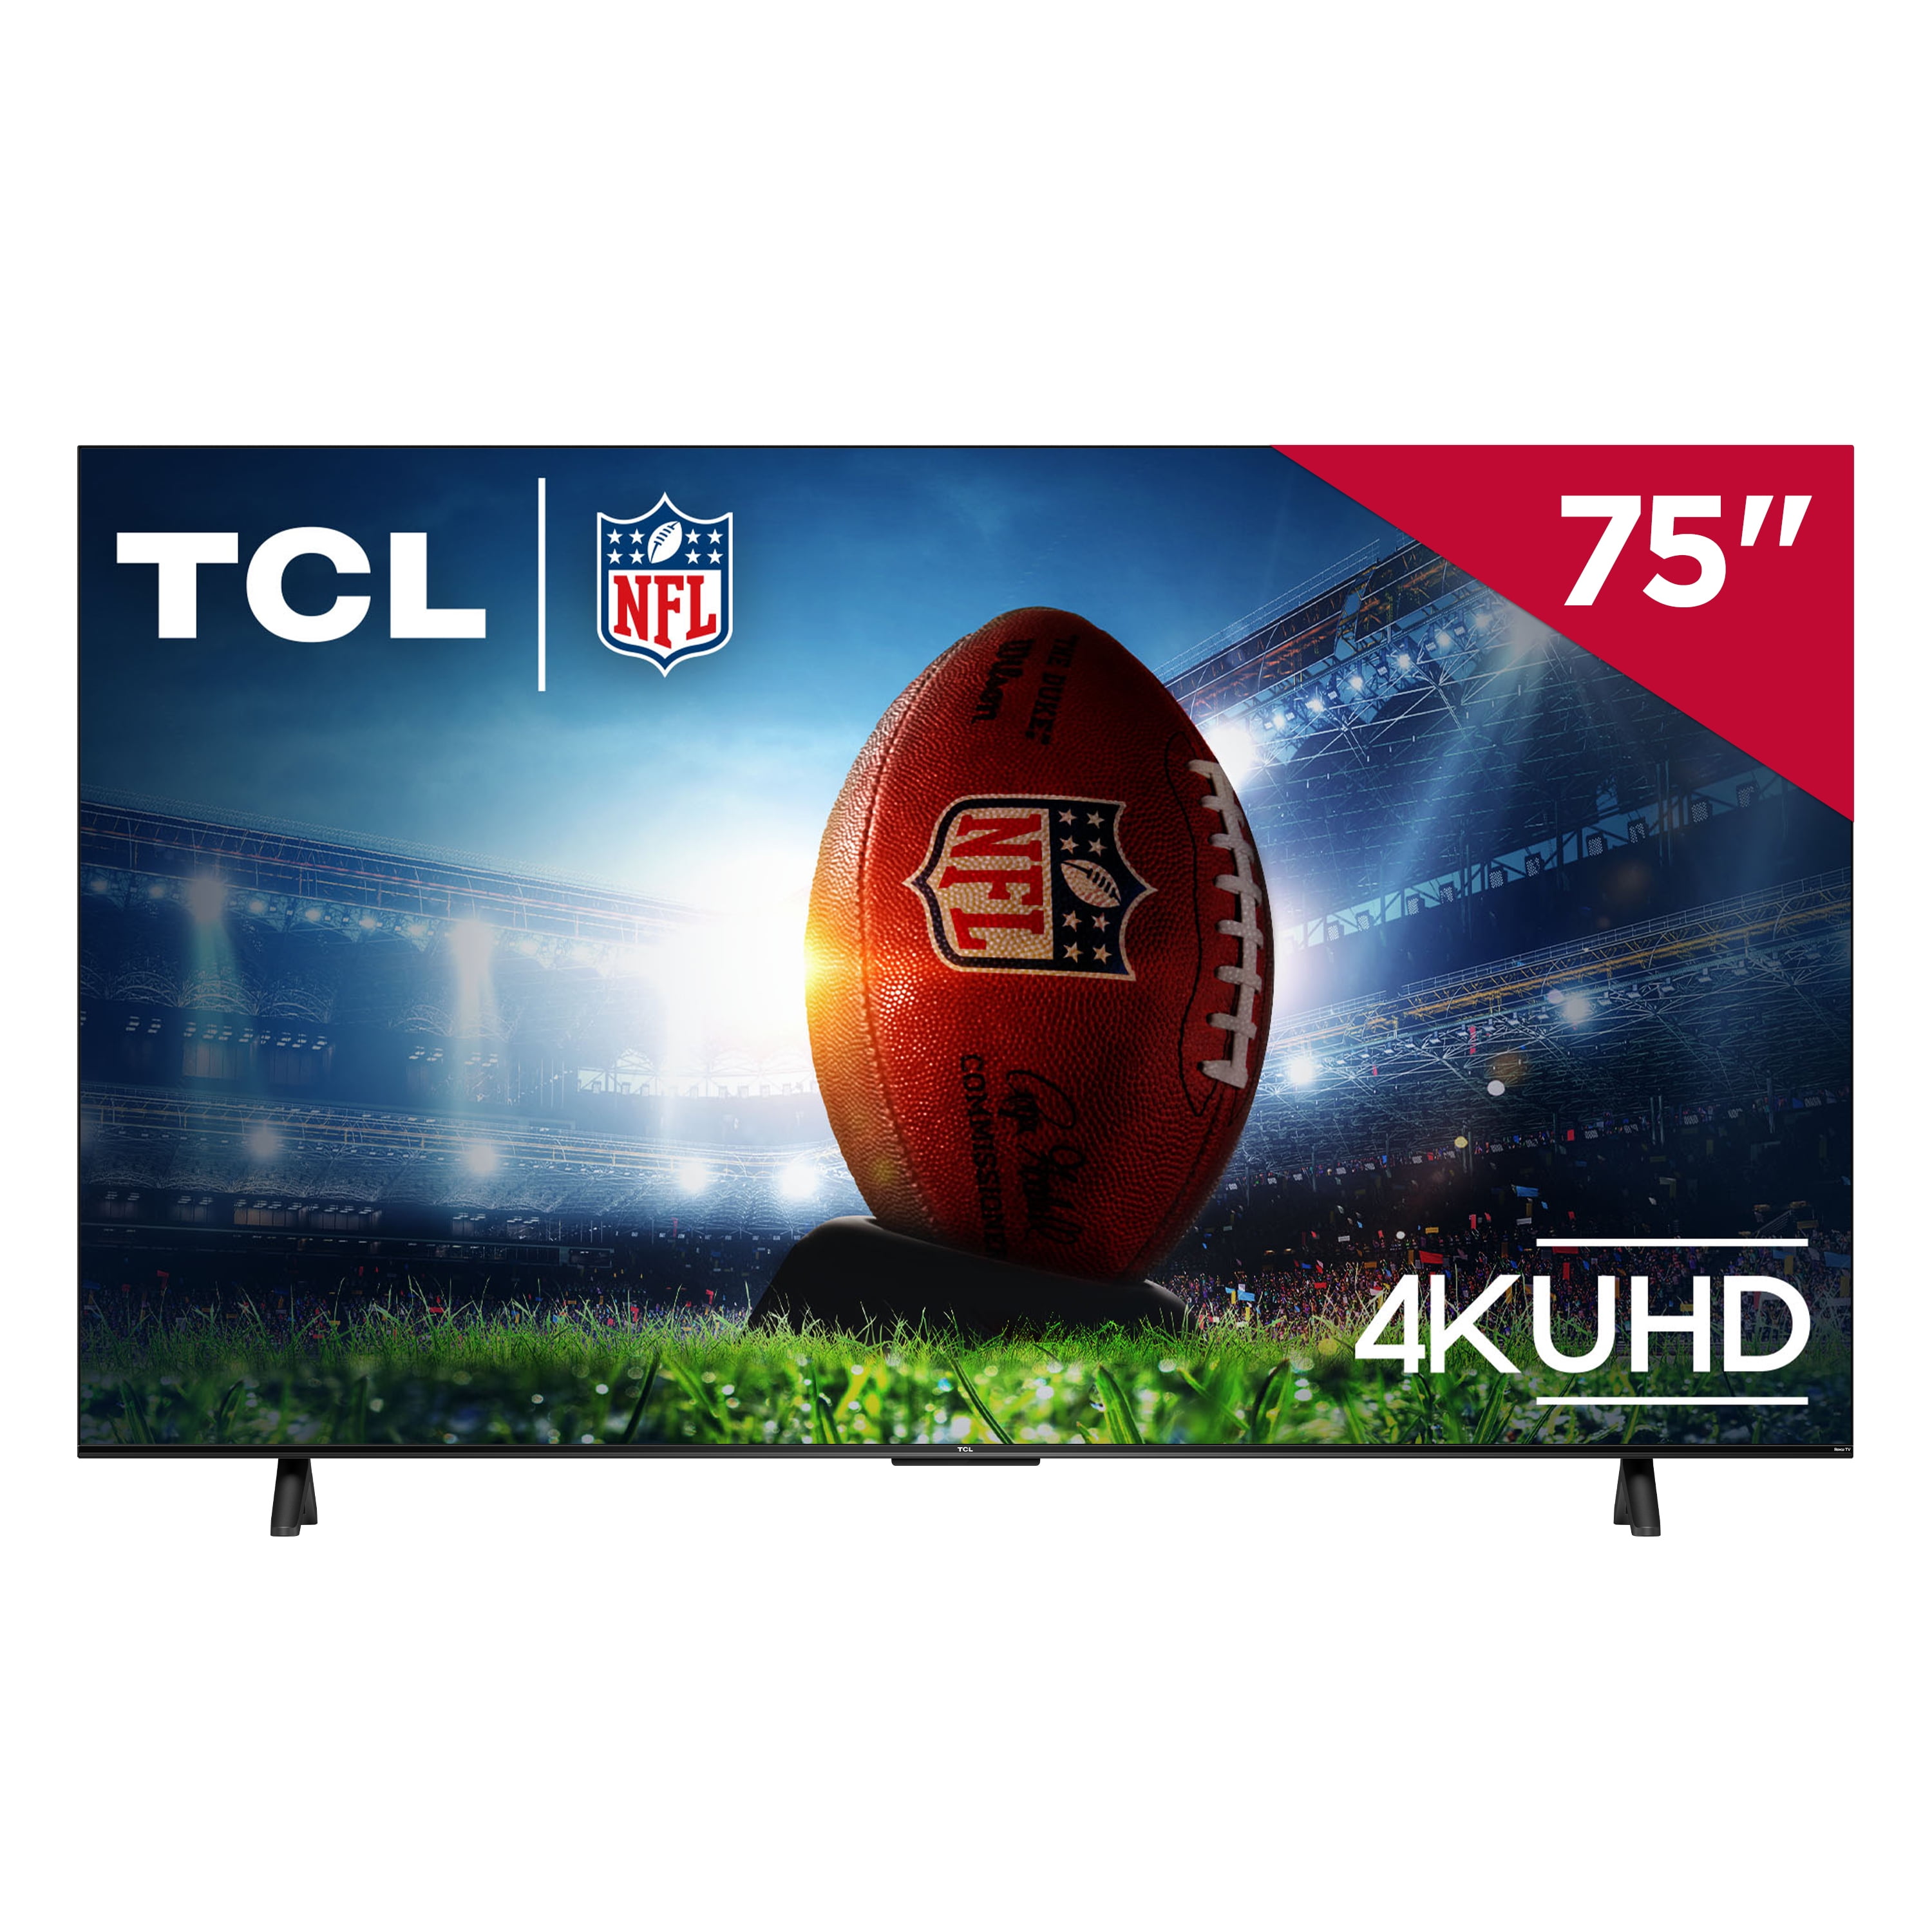 Why Are TCL TVs So Cheap? And Are They Any Good?